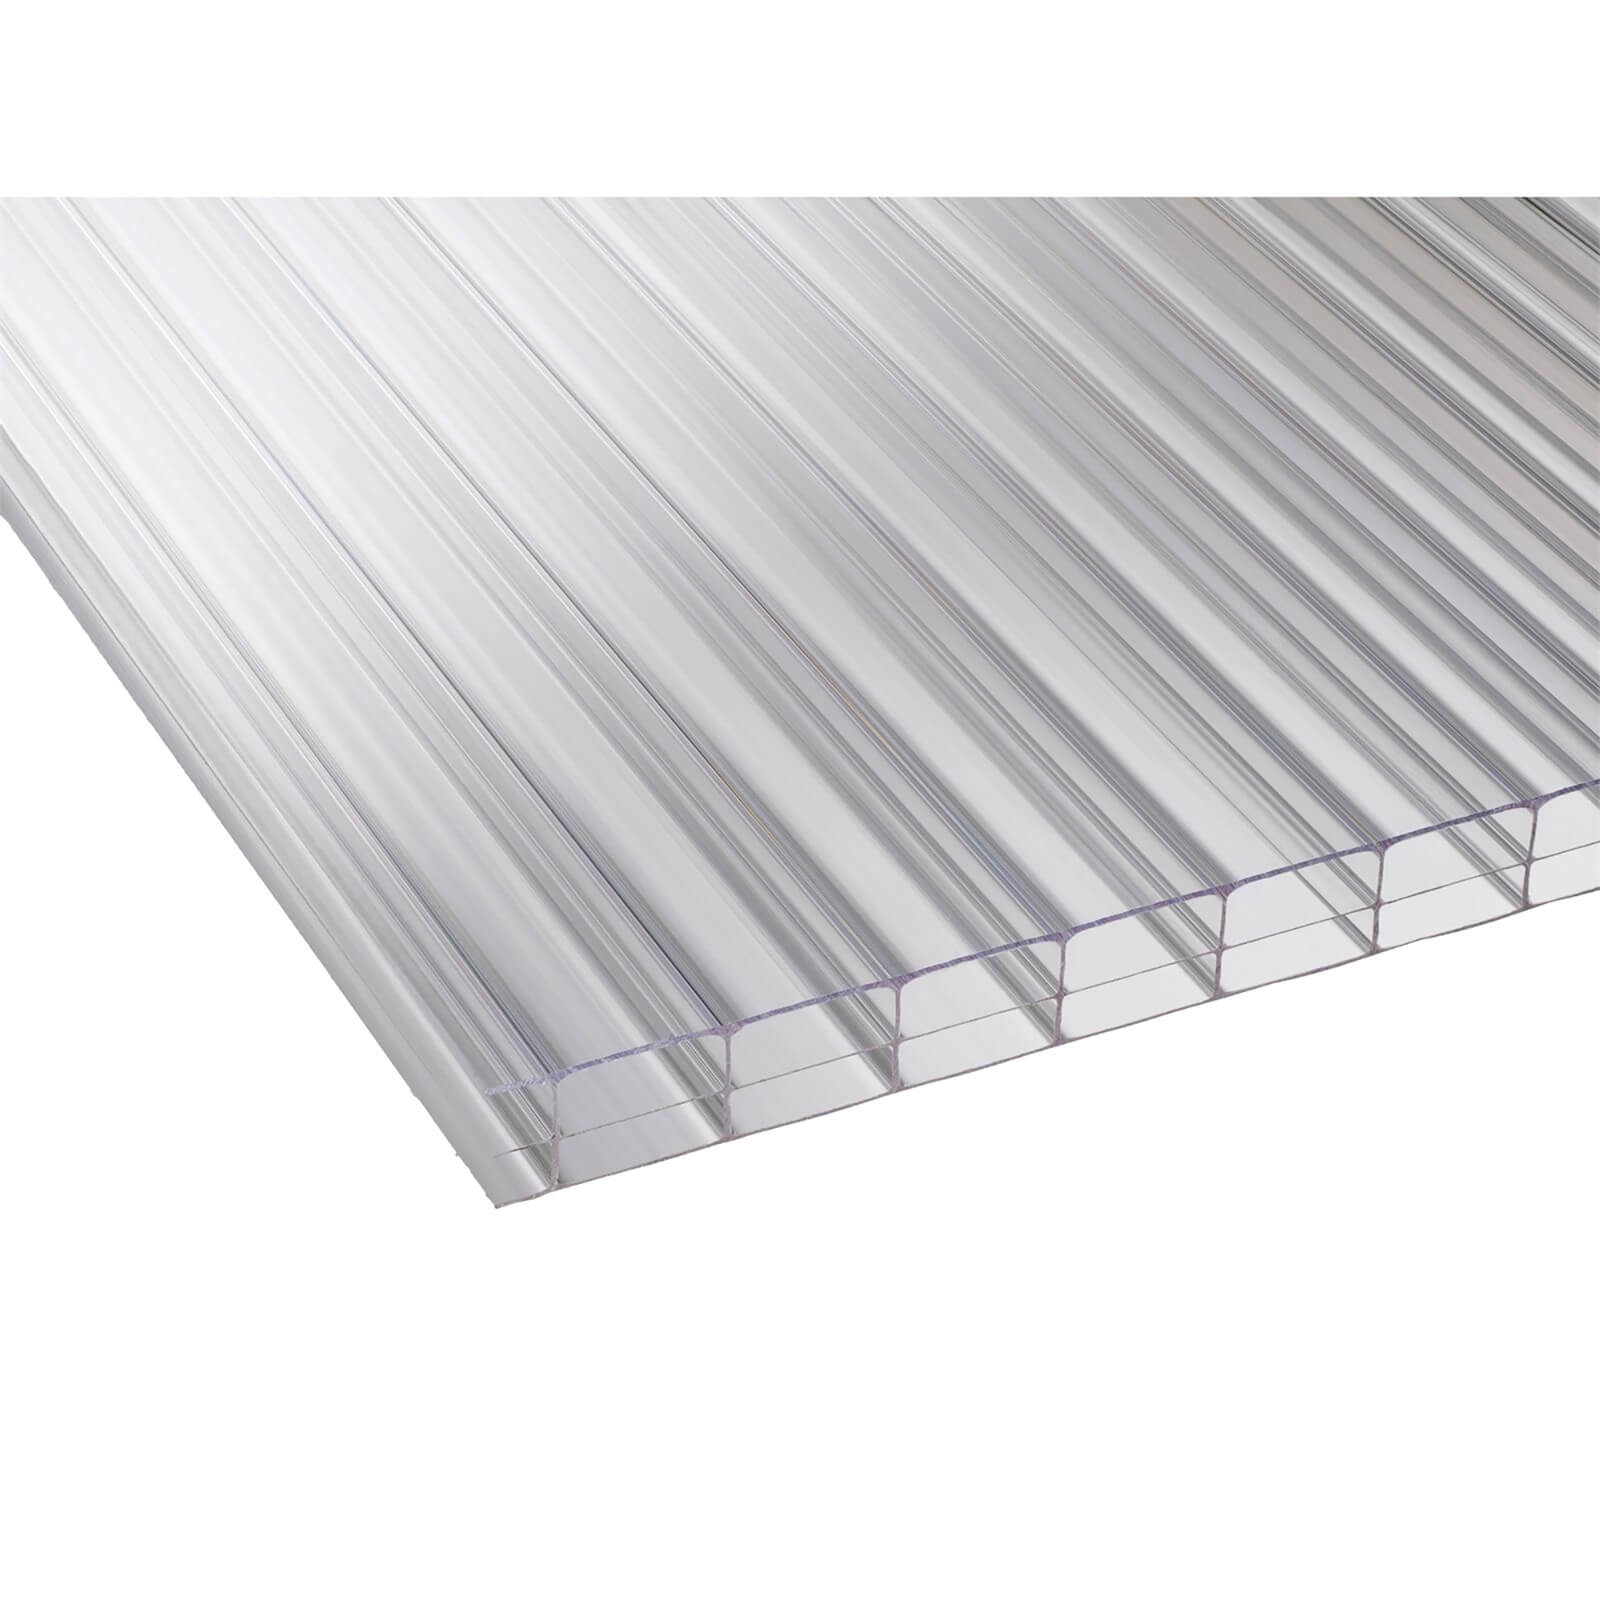 Photo of Corotherm Glazing & Roofing Sheet 2500x1050x16mm Marlon - 3 Pack